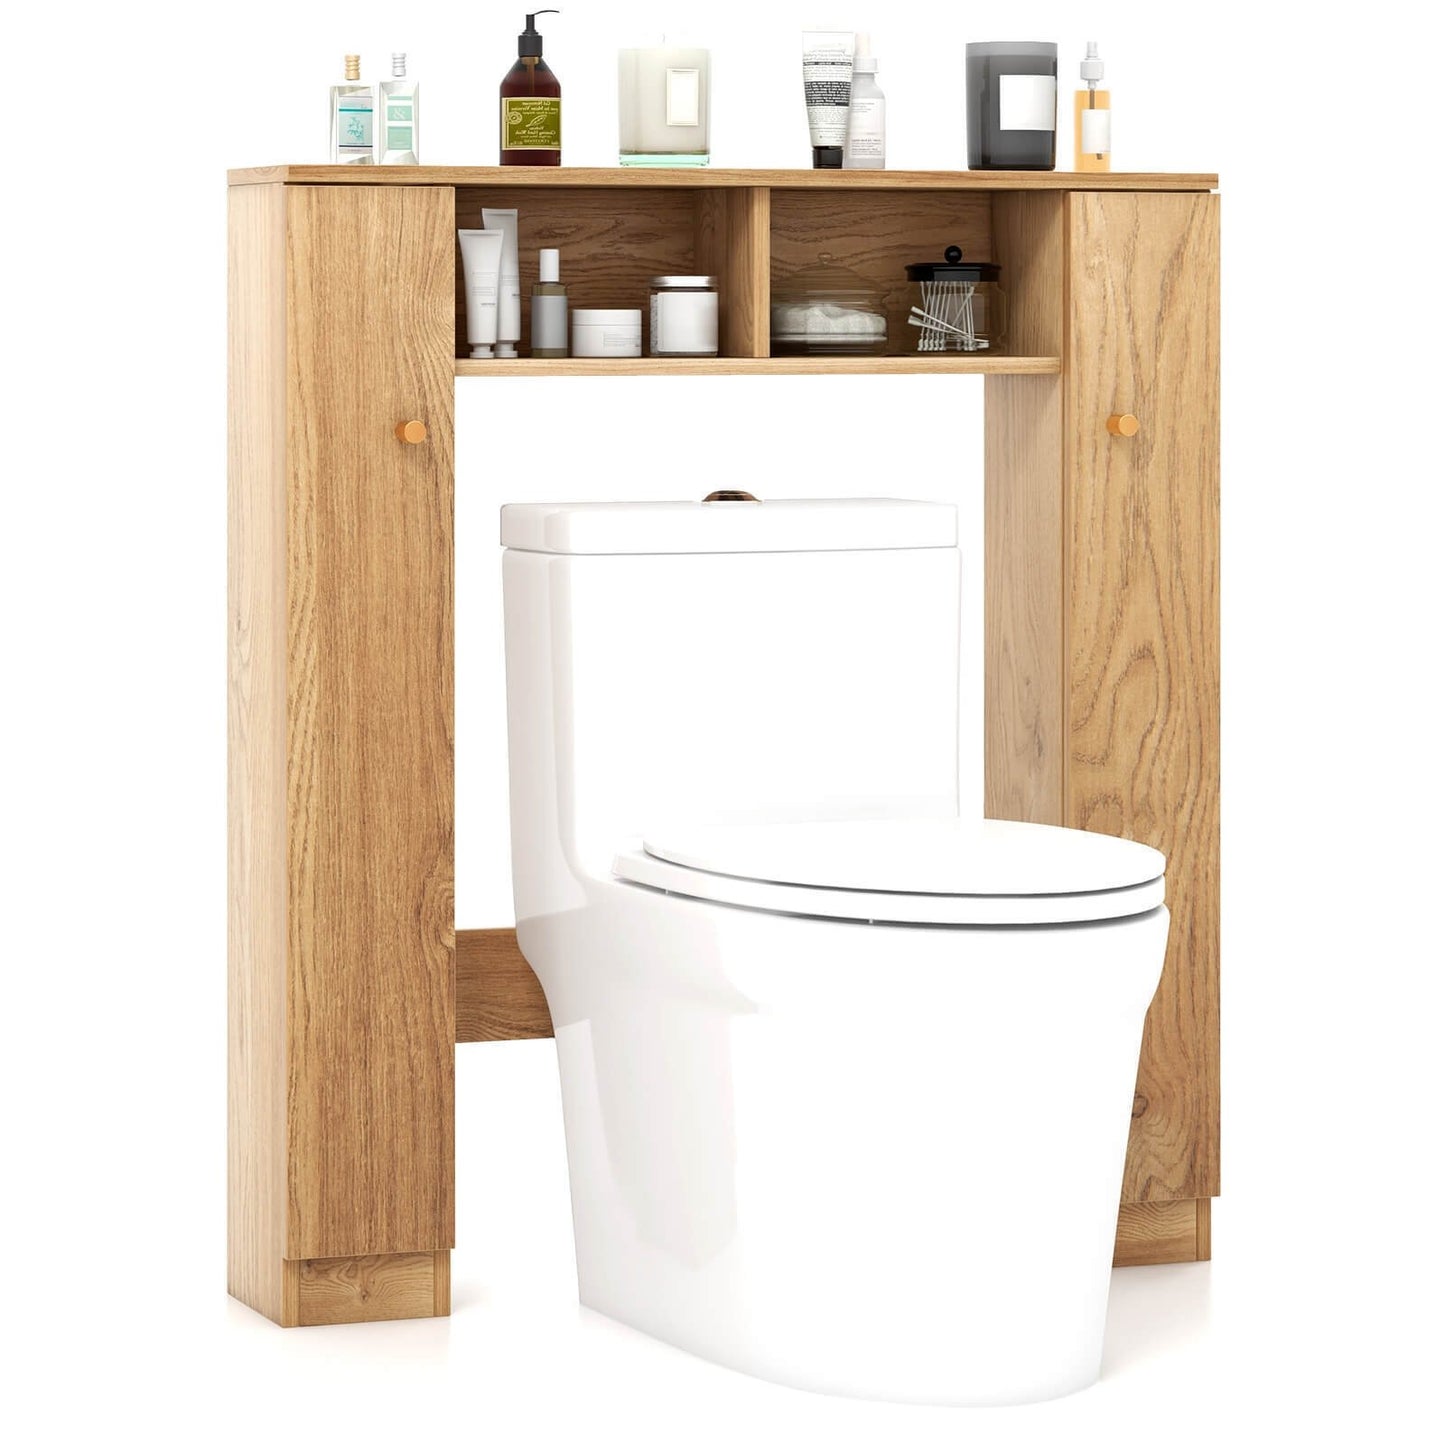 Over The Toilet Storage Cabinet with 2 Open Compartments and 4 Adjustable Shelves, Natural